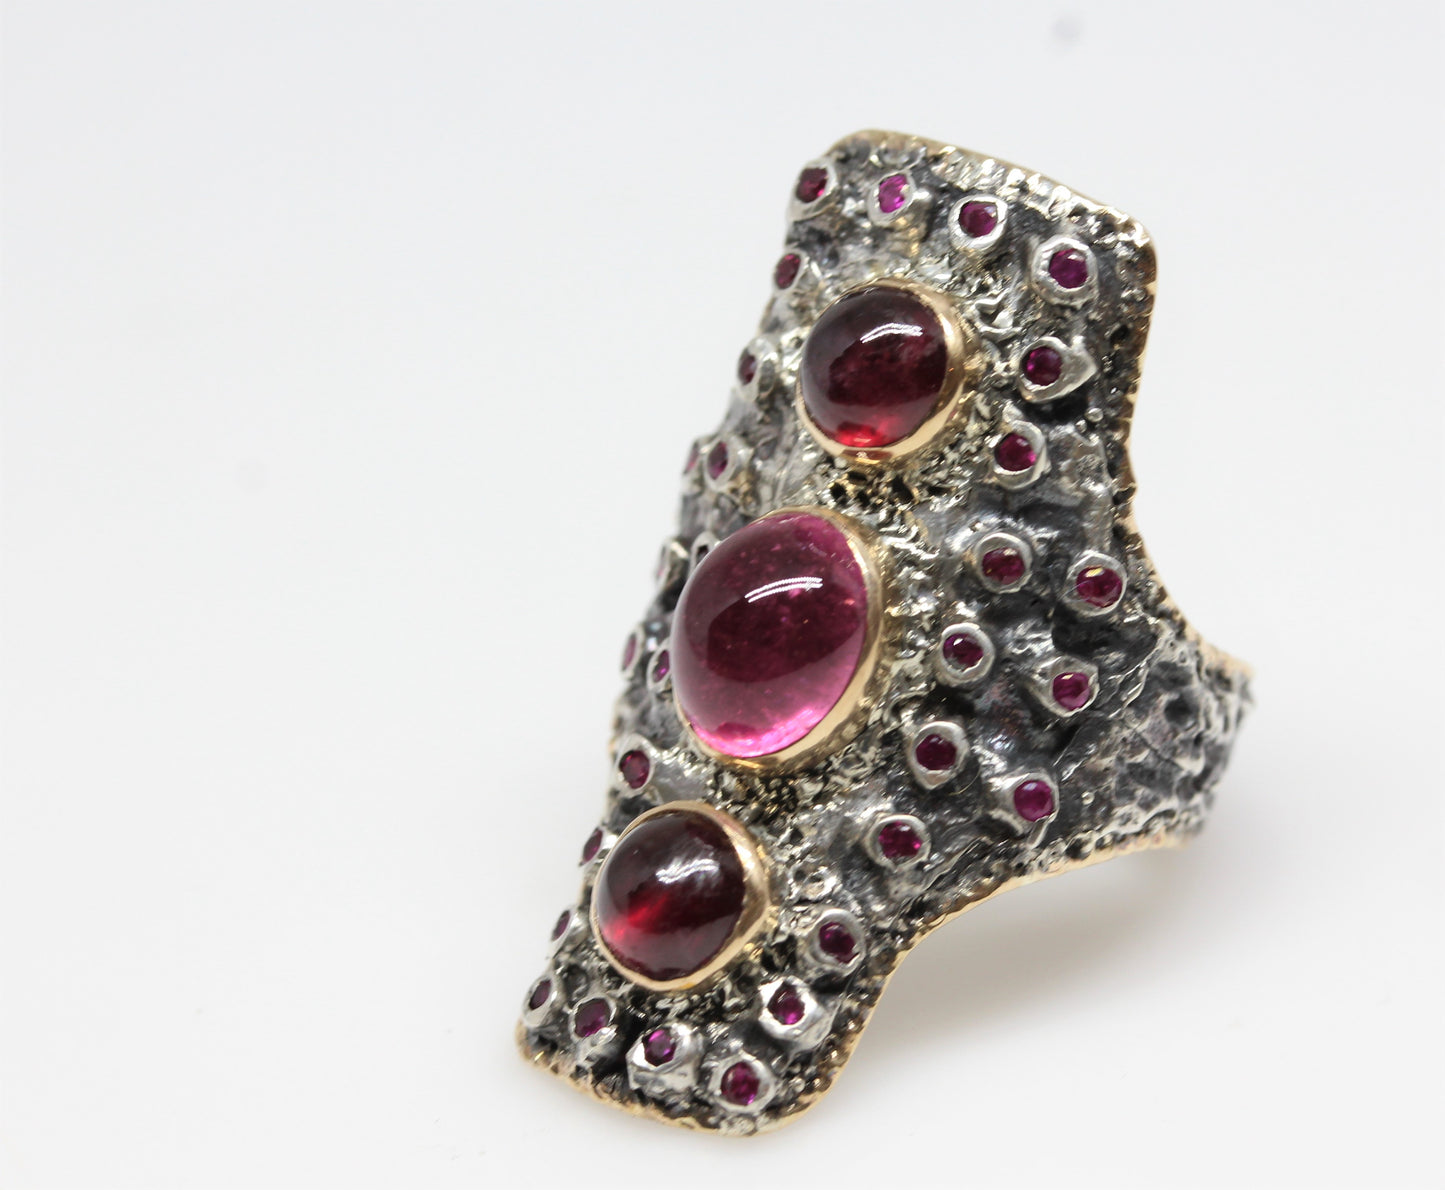 Pink Tourmaline & Ruby Ring - Sterling Silver & Gold Rustic Gemstone Jewelry #236